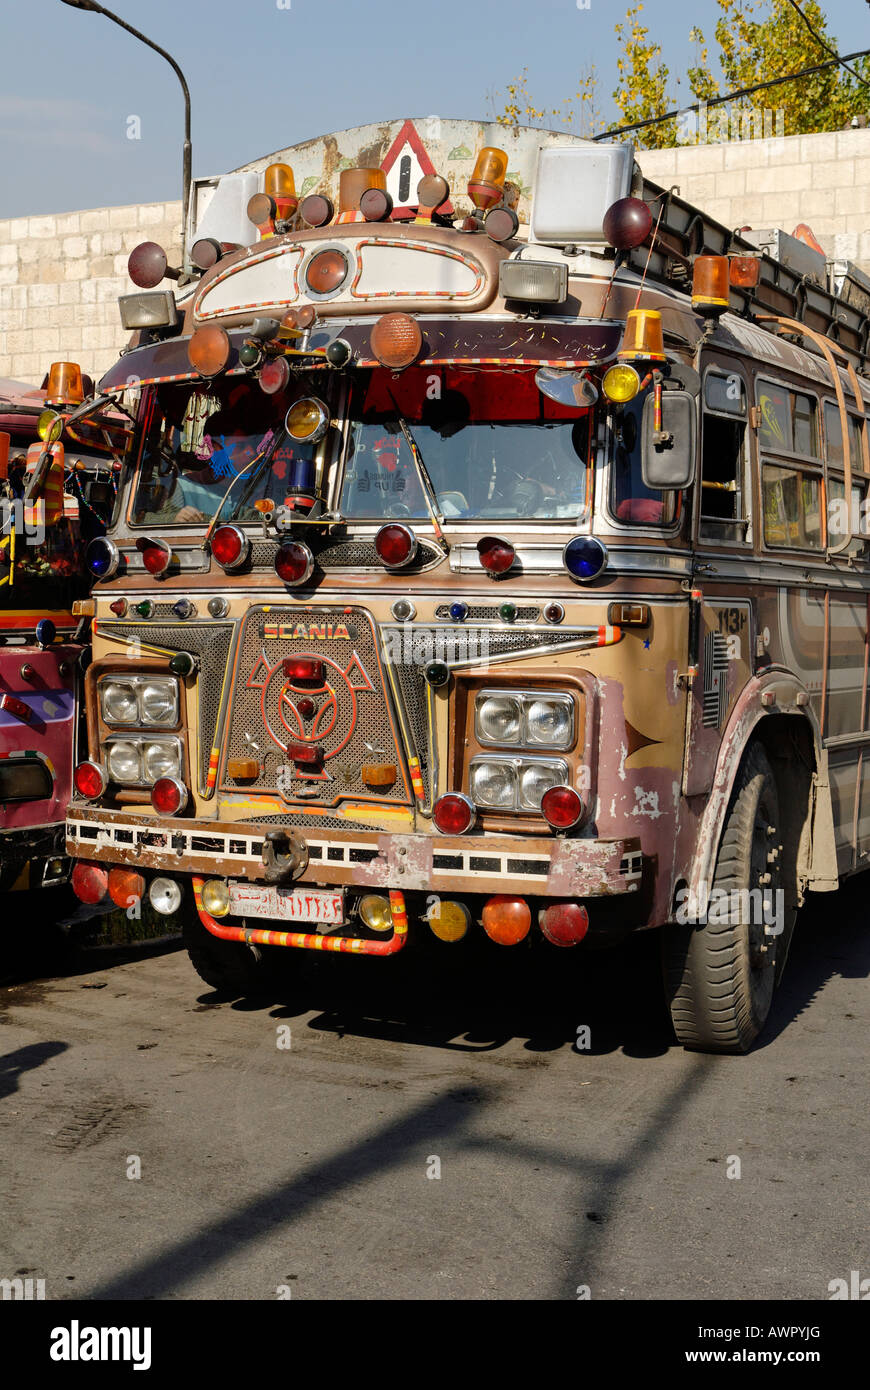 Old decorated bus in the old town of Damascus, Syria Stock Photo